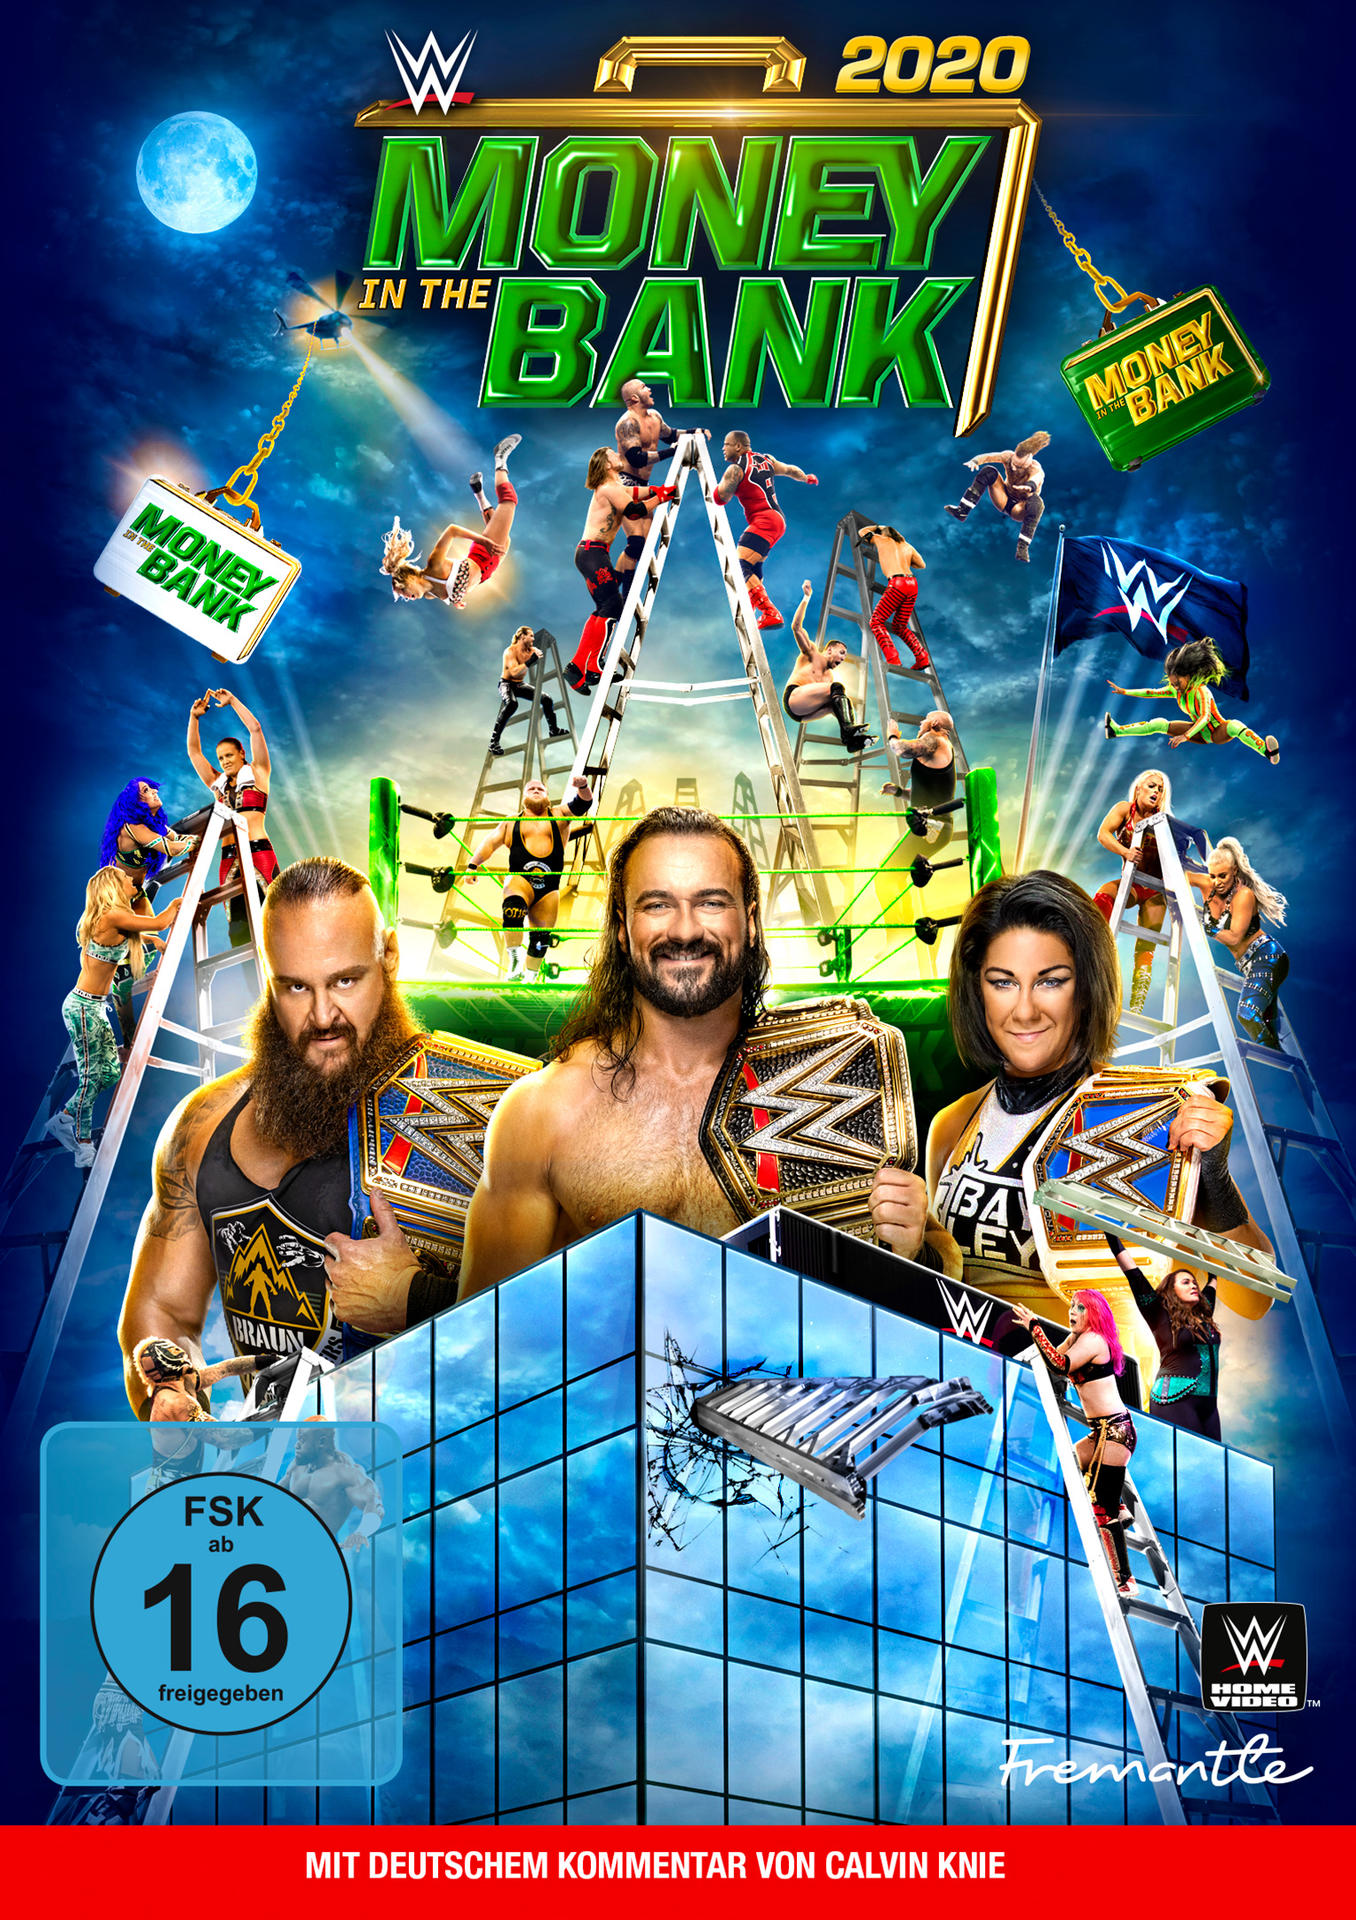 2020 The Bank In Money DVD WWE: